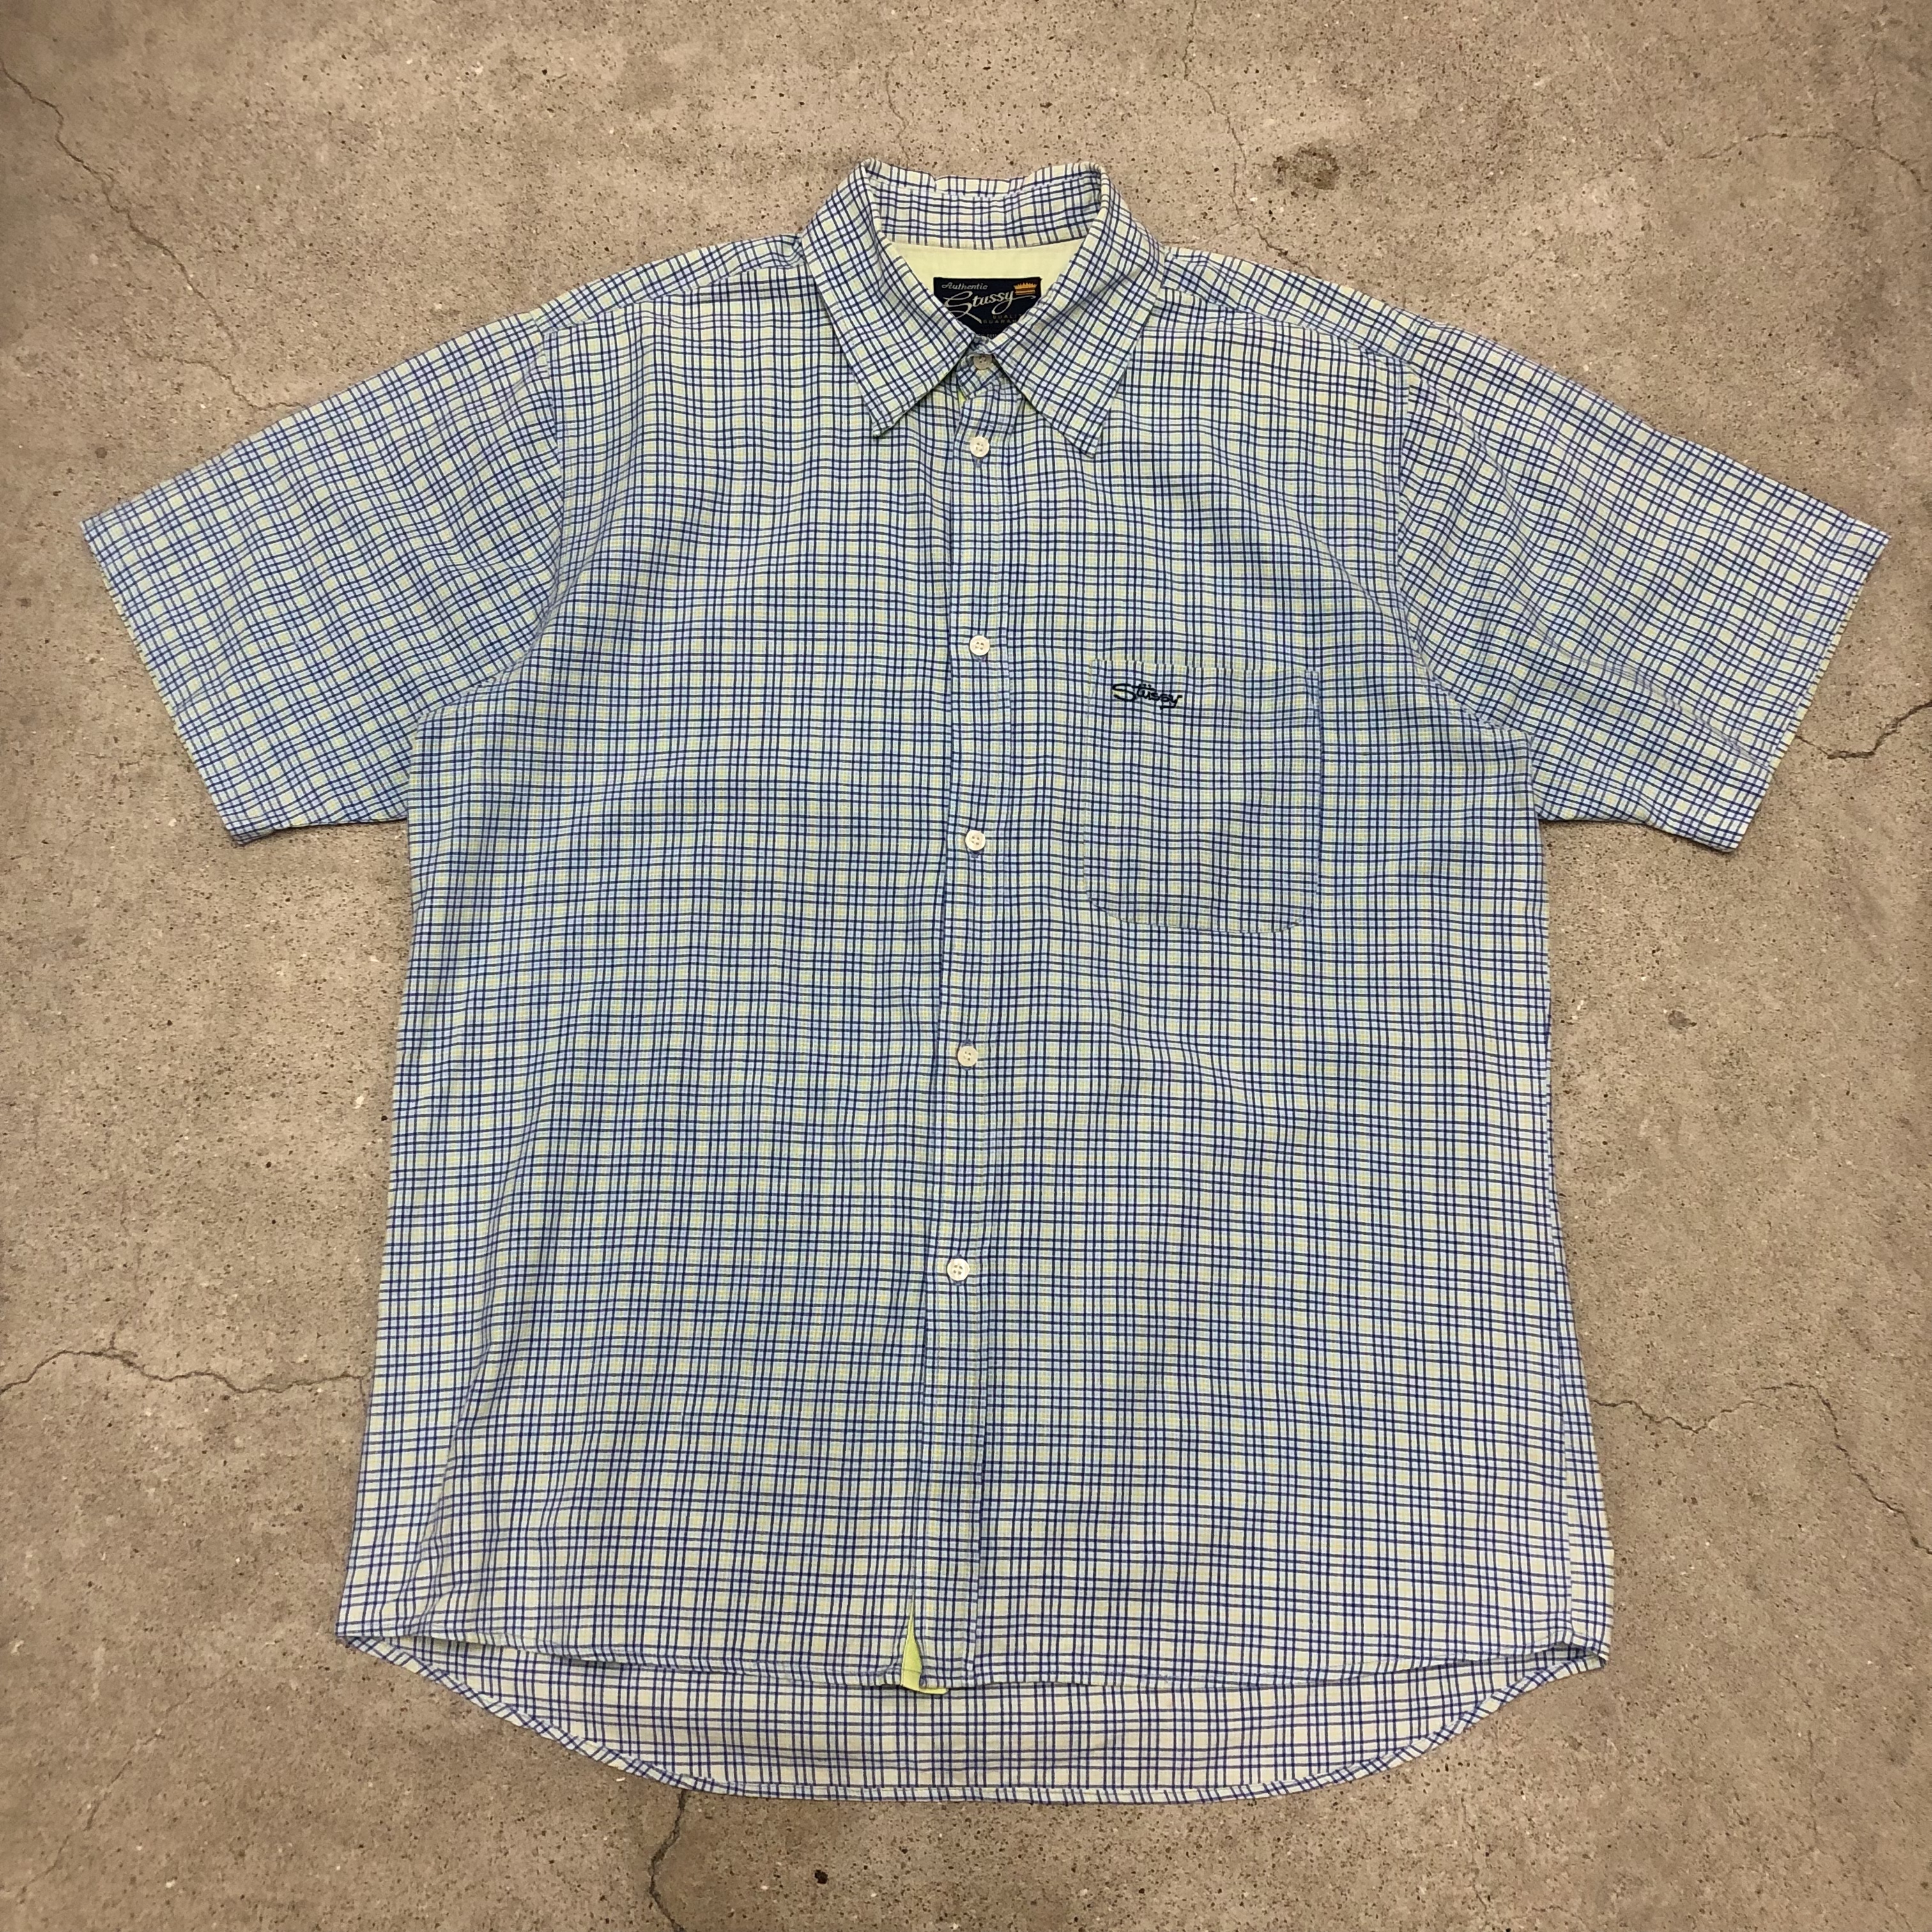 90～00s OLD STUSSY/Check s/s Shirt/紺タグ/INDIA製/XL/チェック柄 